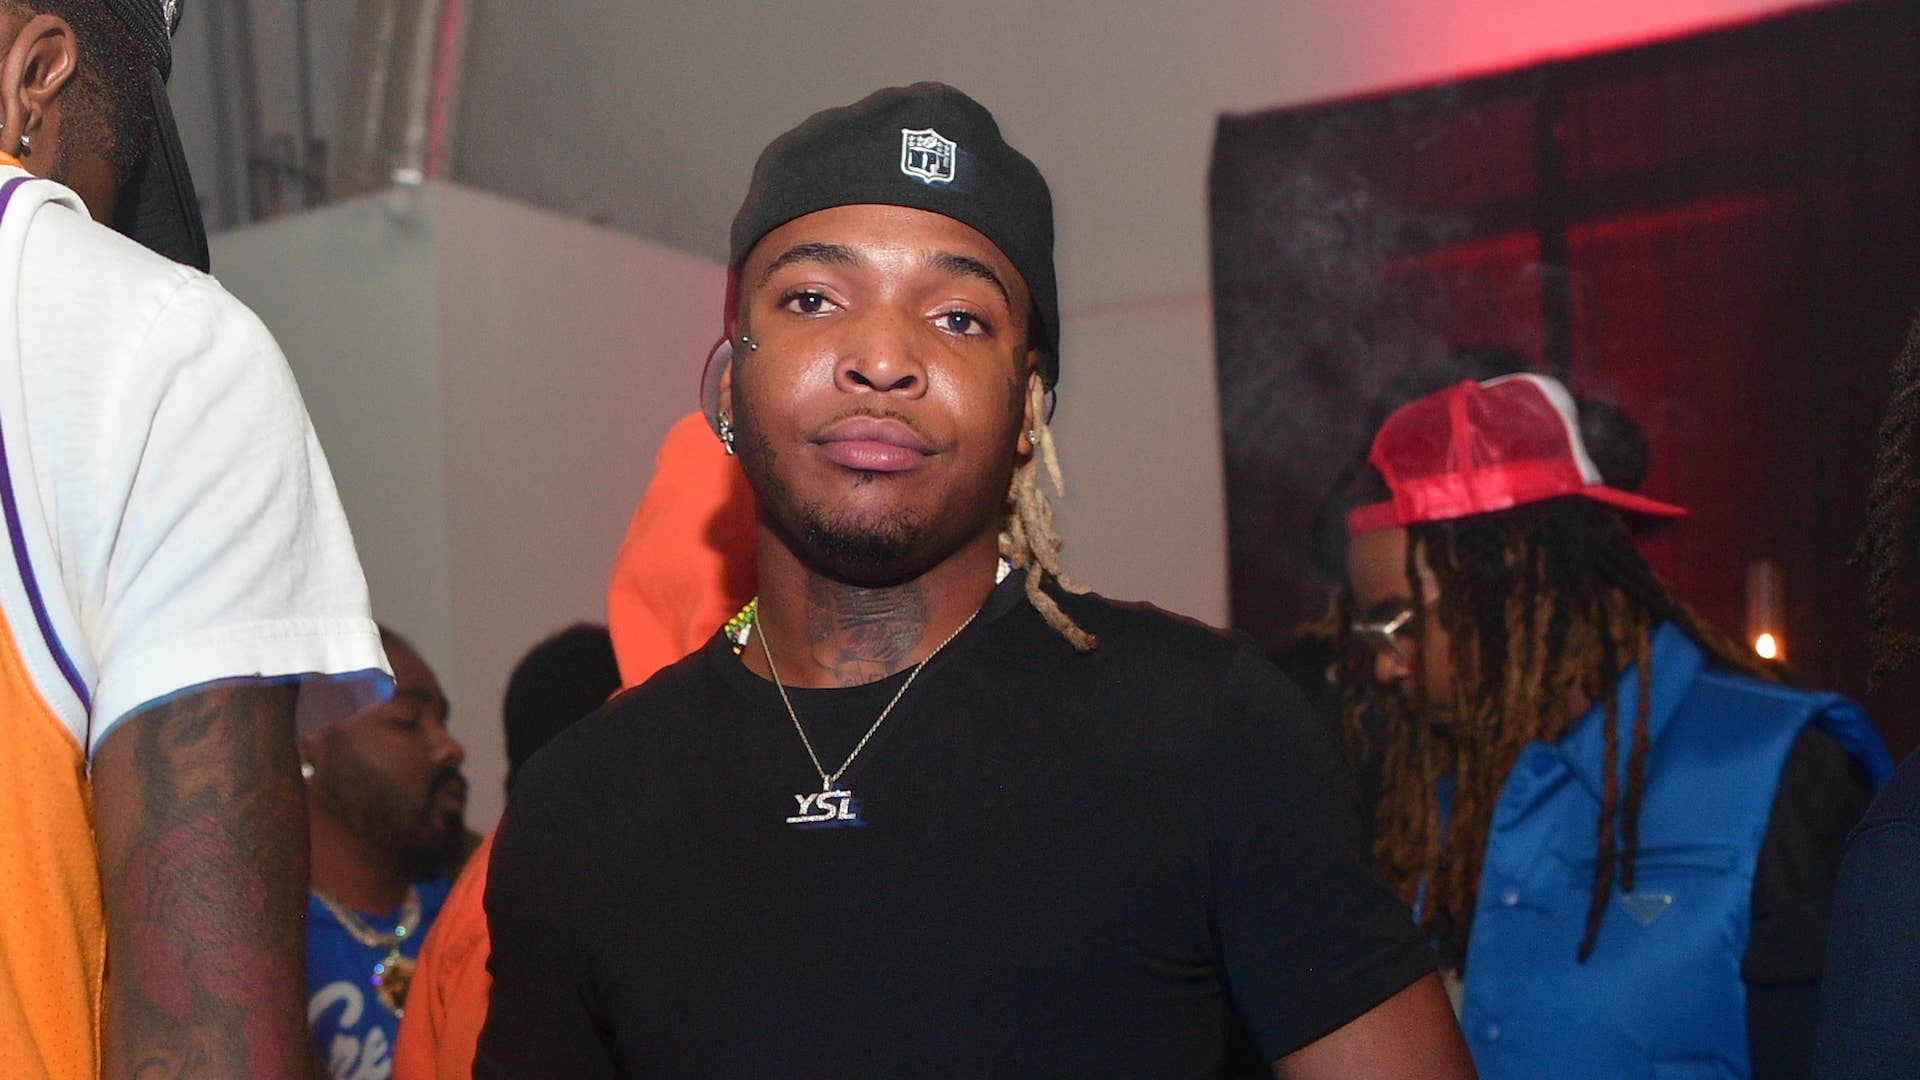 Rapper Lil Keed attends producer Wheezy's birthday party